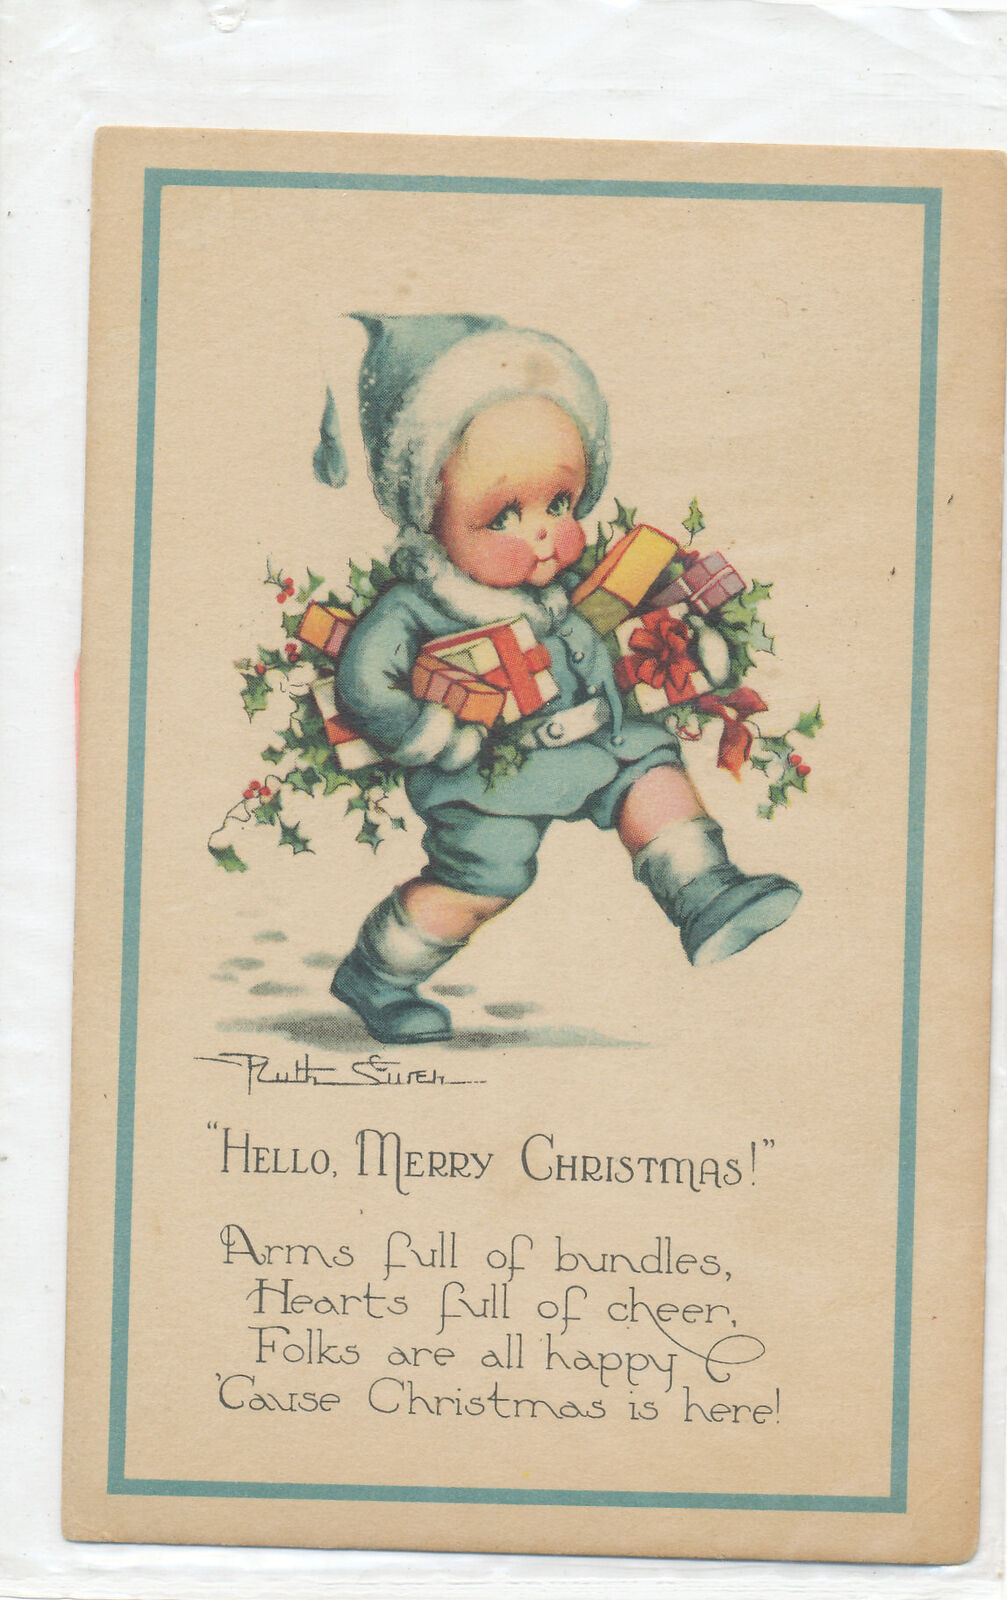 CHRISTMAS postcard -  A/S R SUREH - BOY WITH GIFTS used 1925